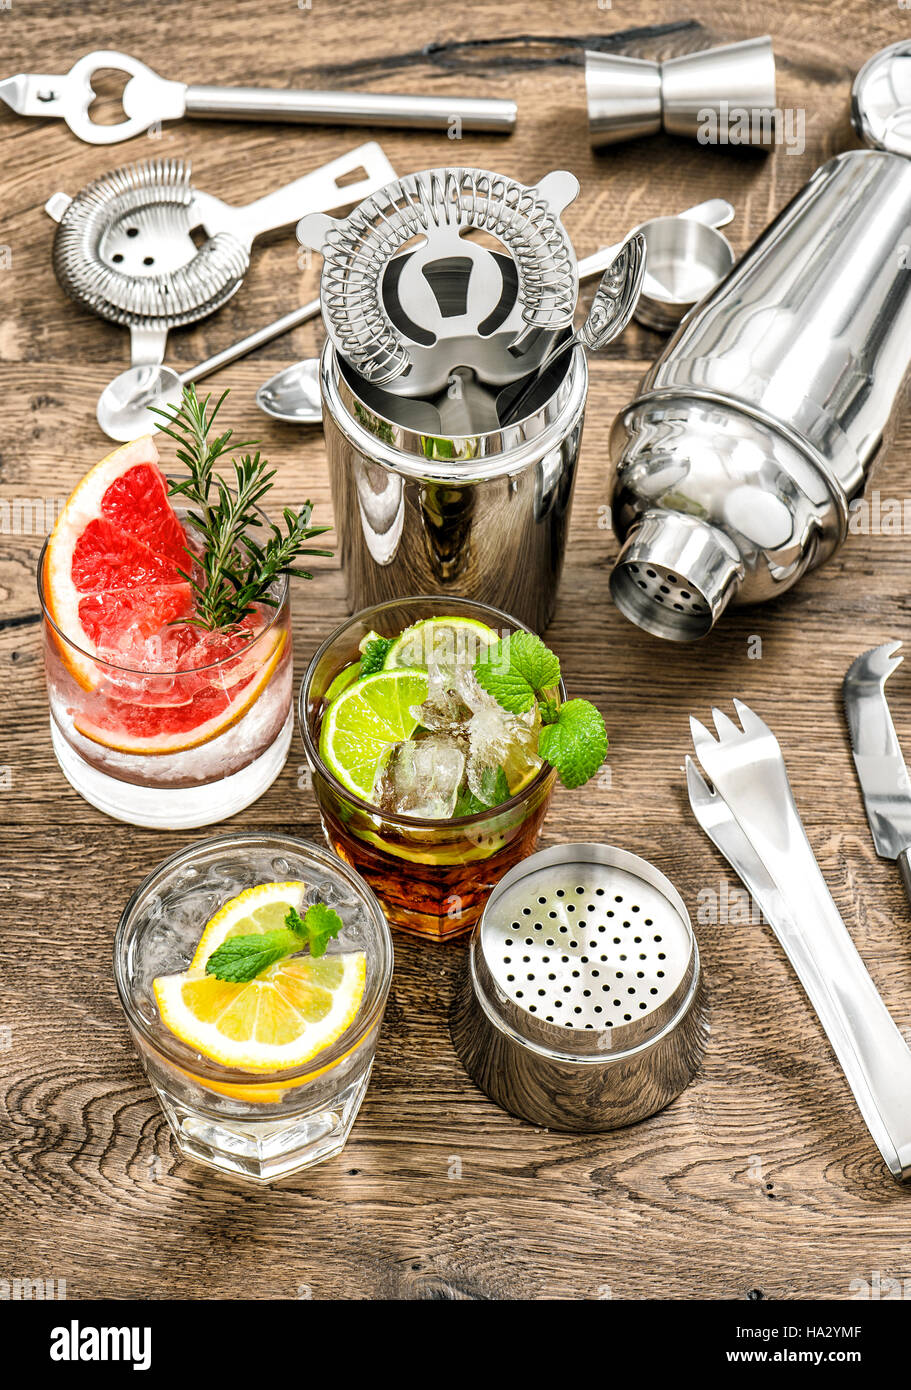 Party drinks. Cocktails with fruits and ice. Juice. Aperitif. Bar drink making tools Stock Photo